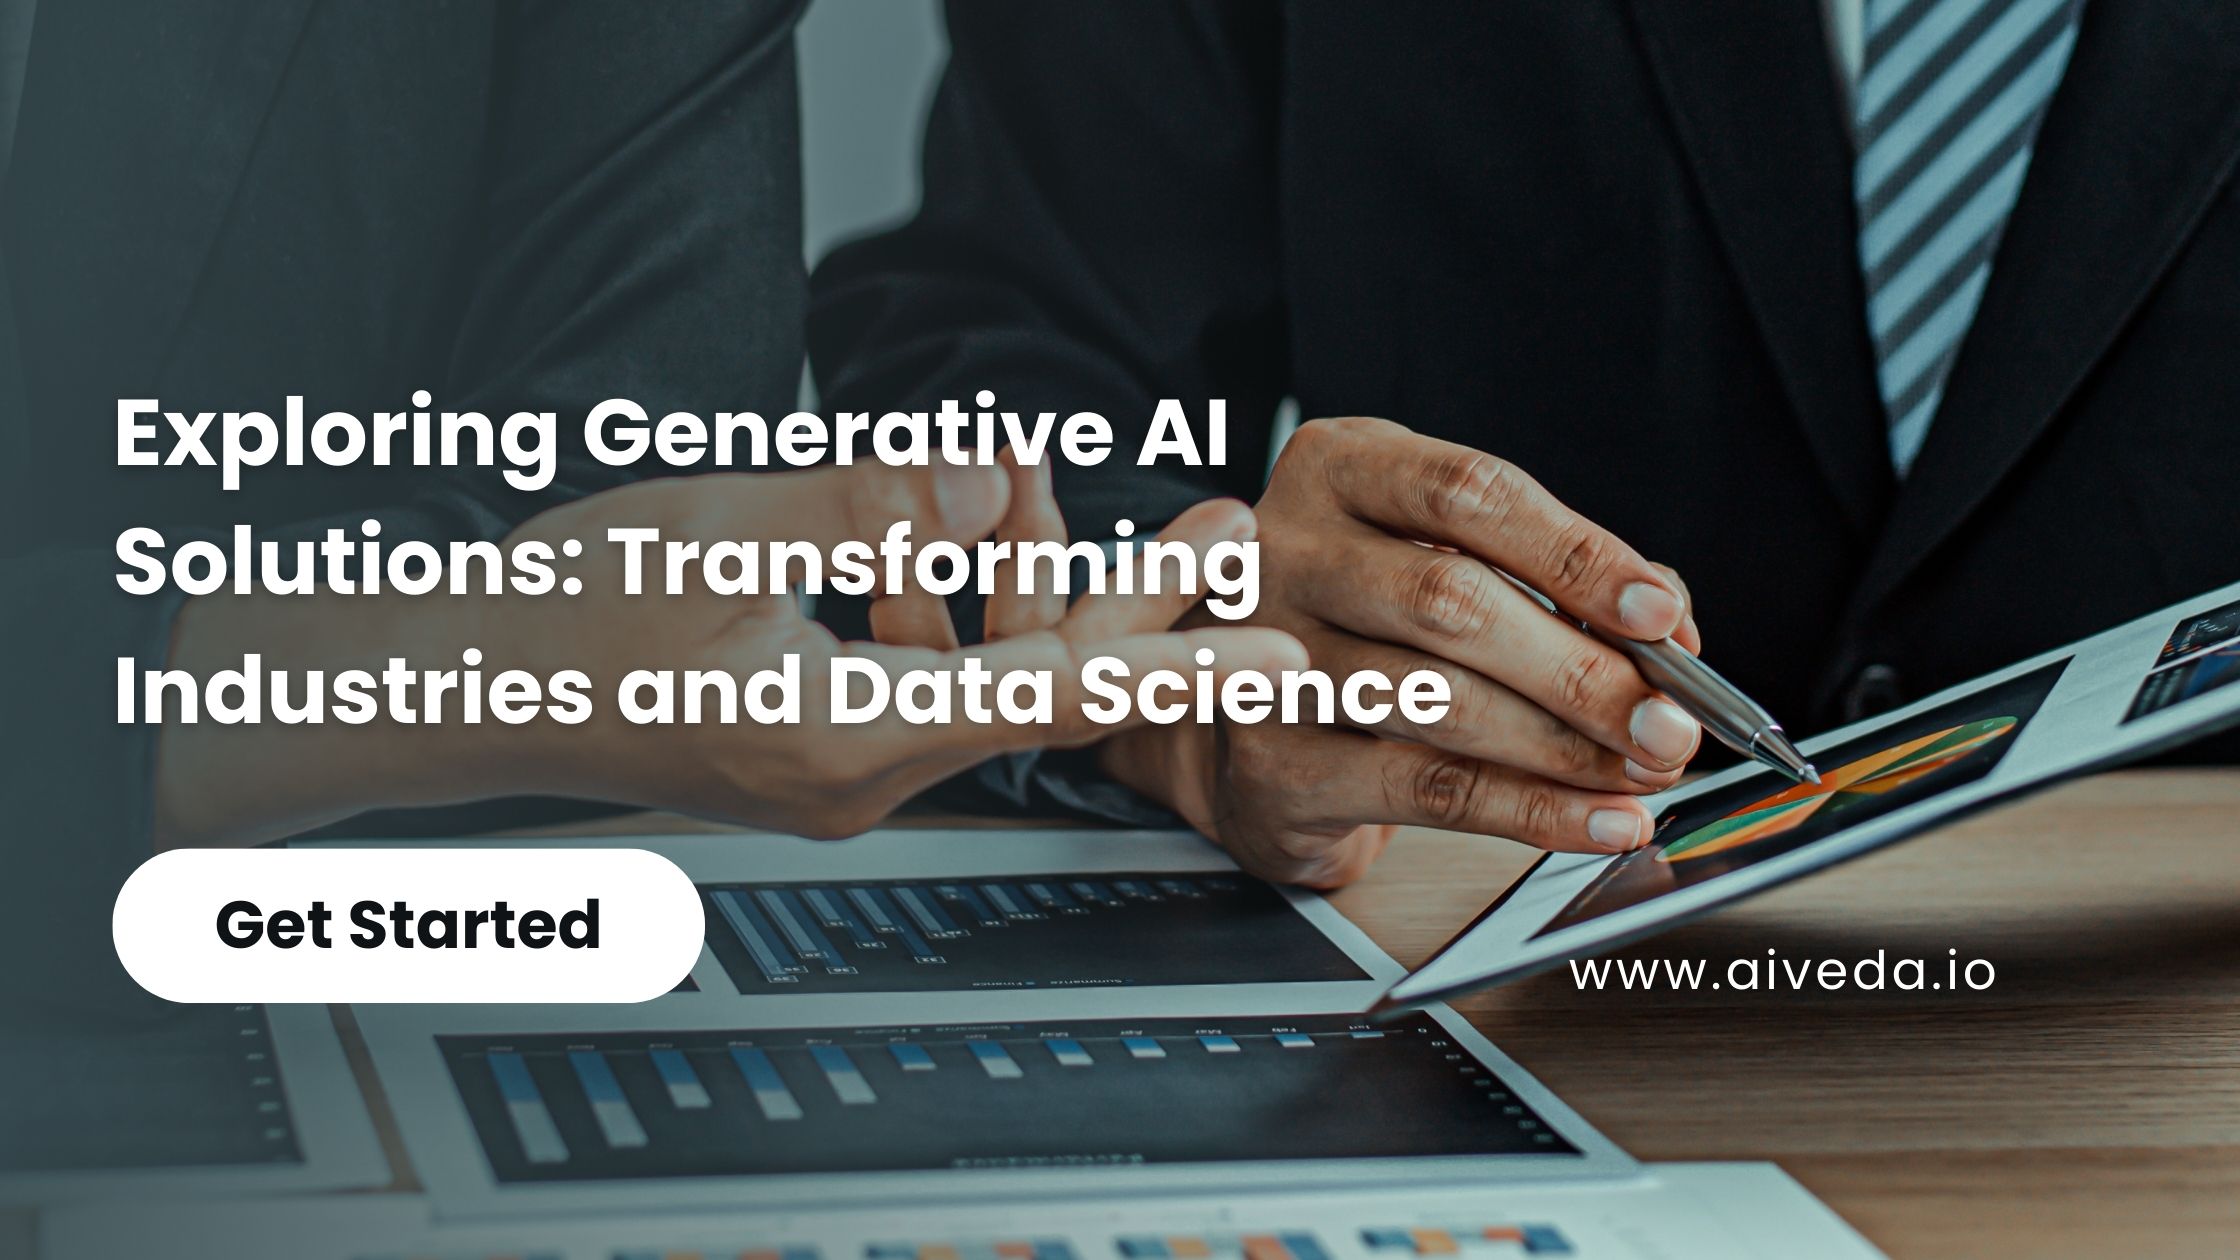 Exploring Generative AI Solutions Transforming Industries and Data Science